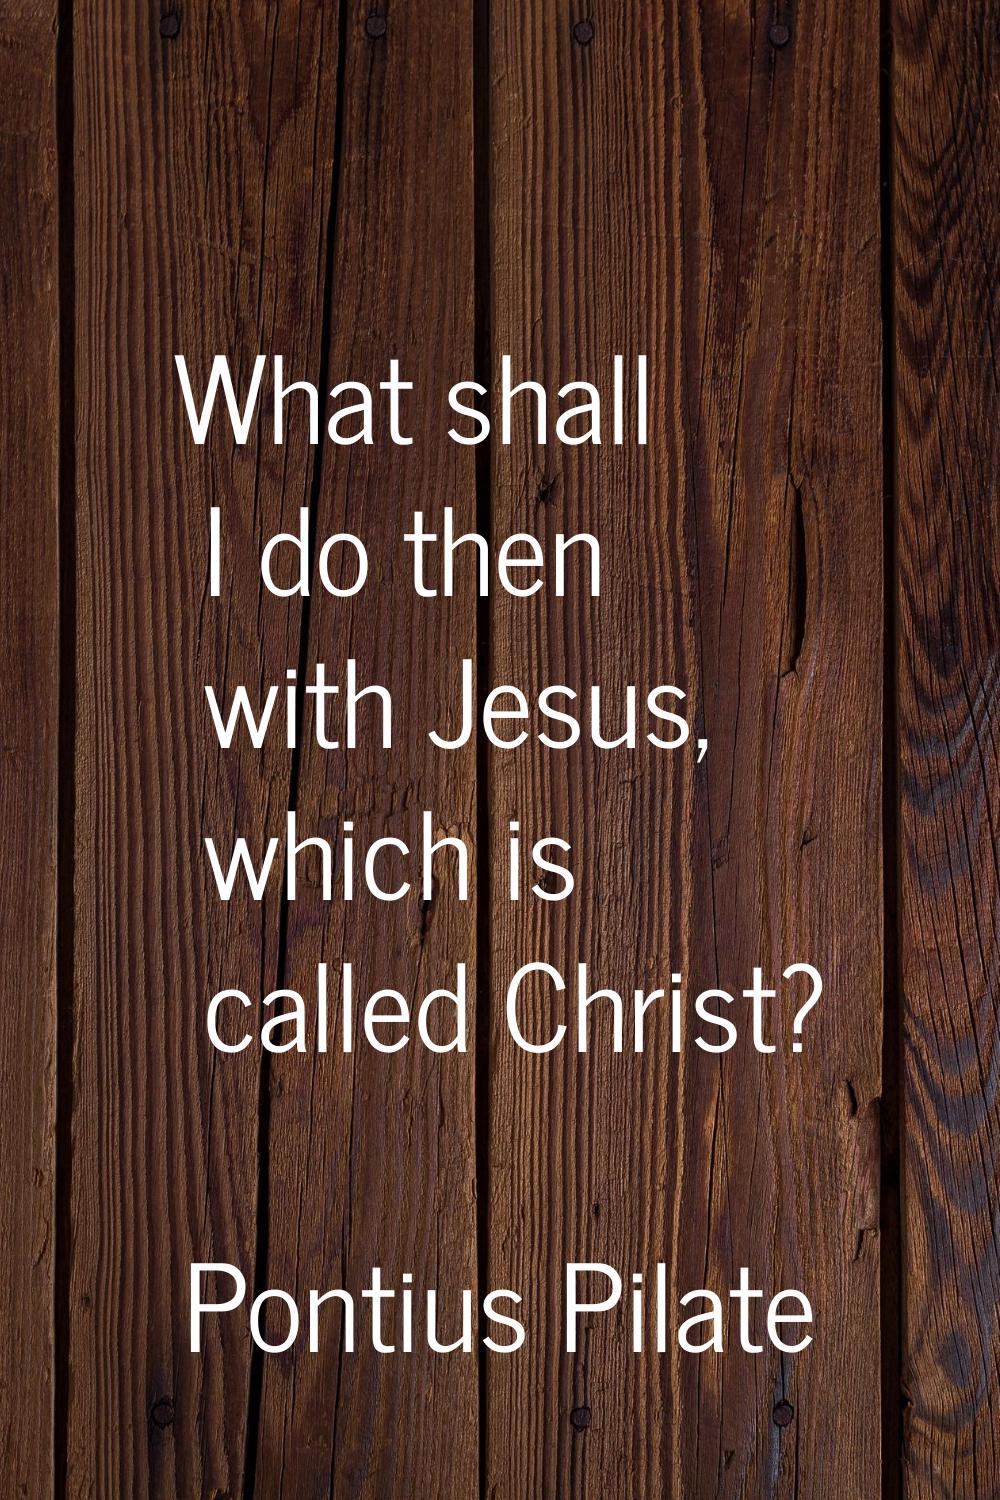 What shall I do then with Jesus, which is called Christ?